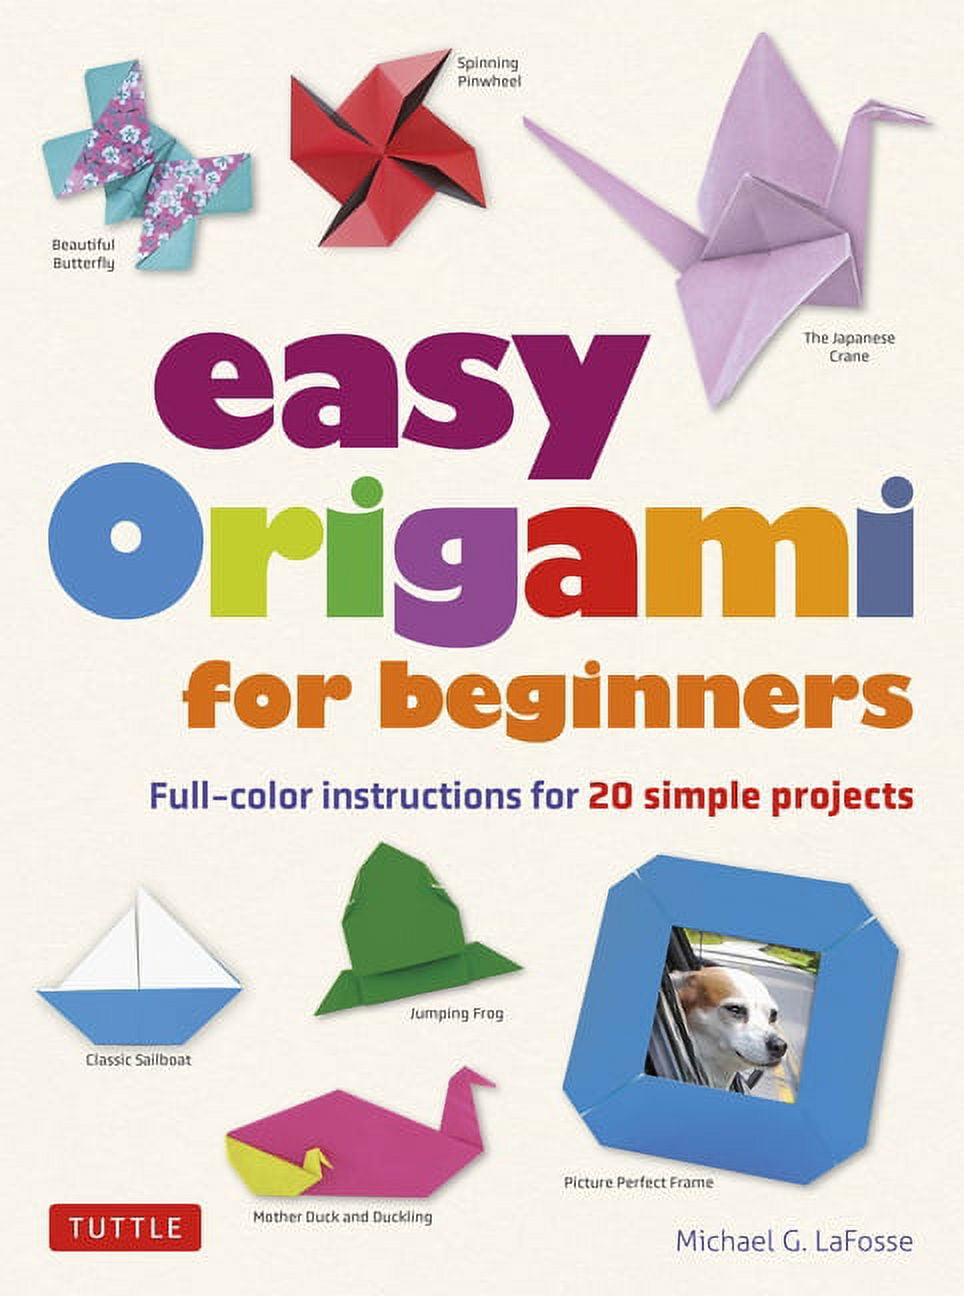 Origami Book for Beginners 4: A Step-by-Step Introduction to the Japanese  Art of Paper Folding for Kids & Adults (Paperback)